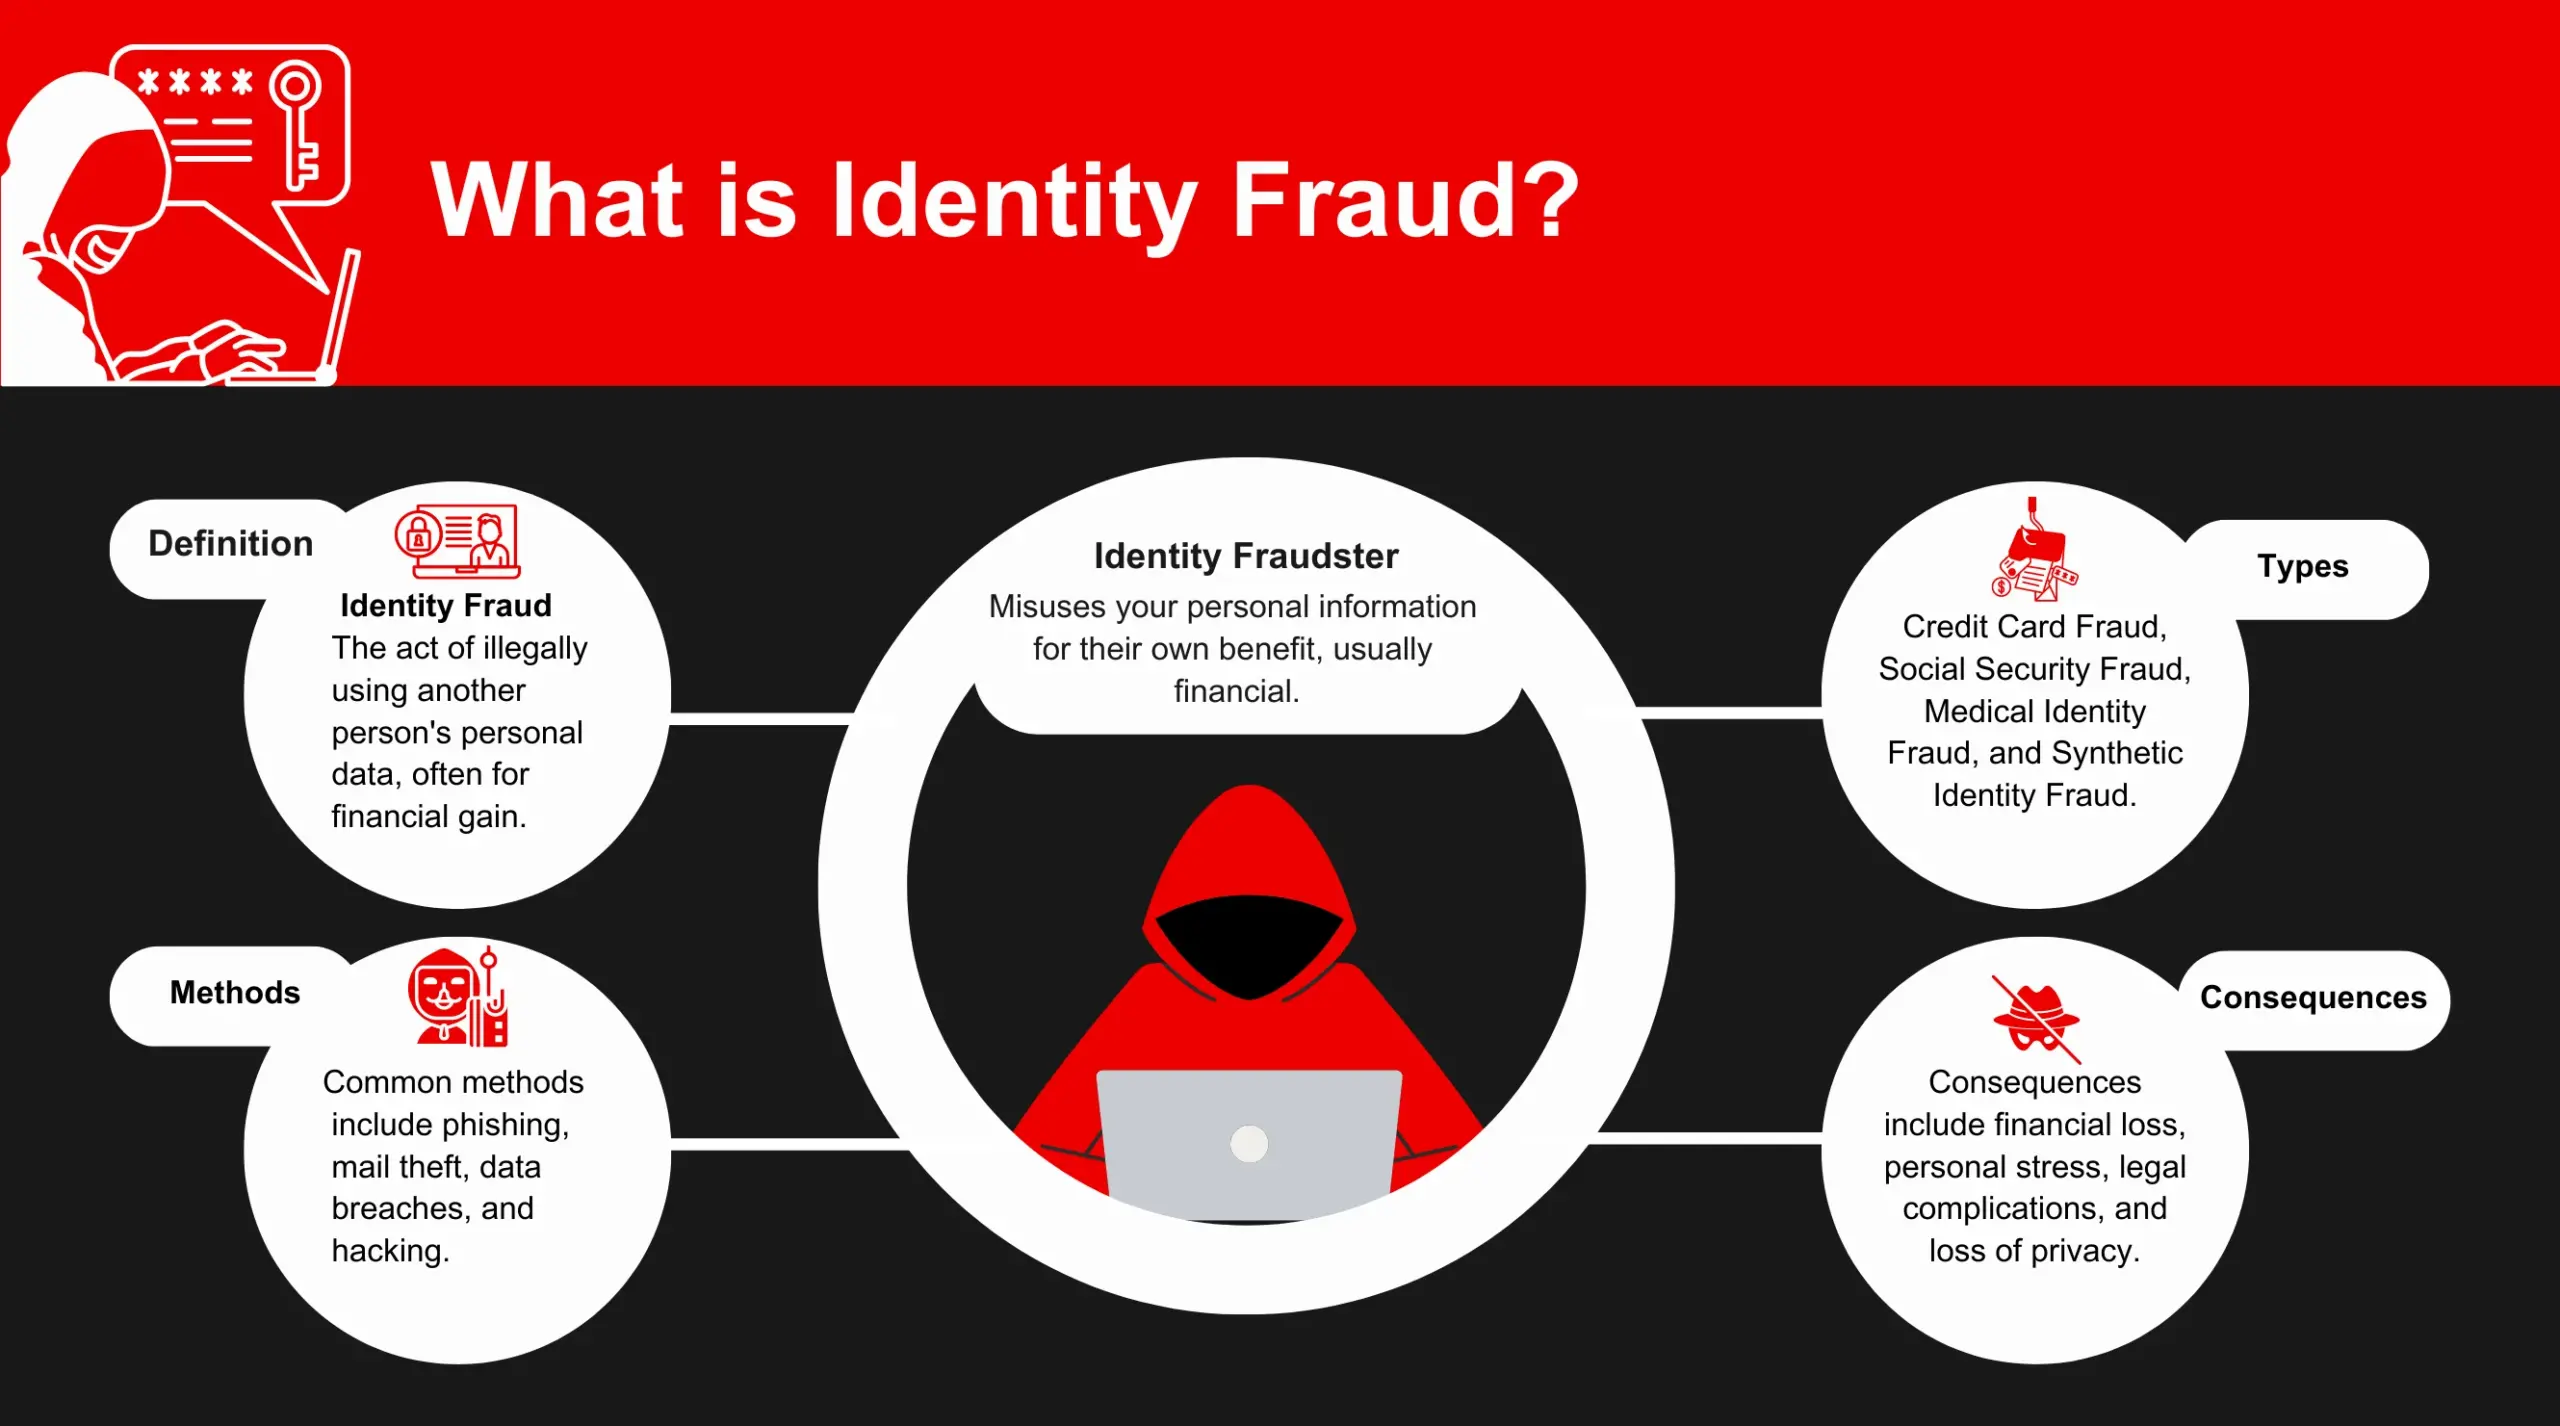 What is Identity Fraud?